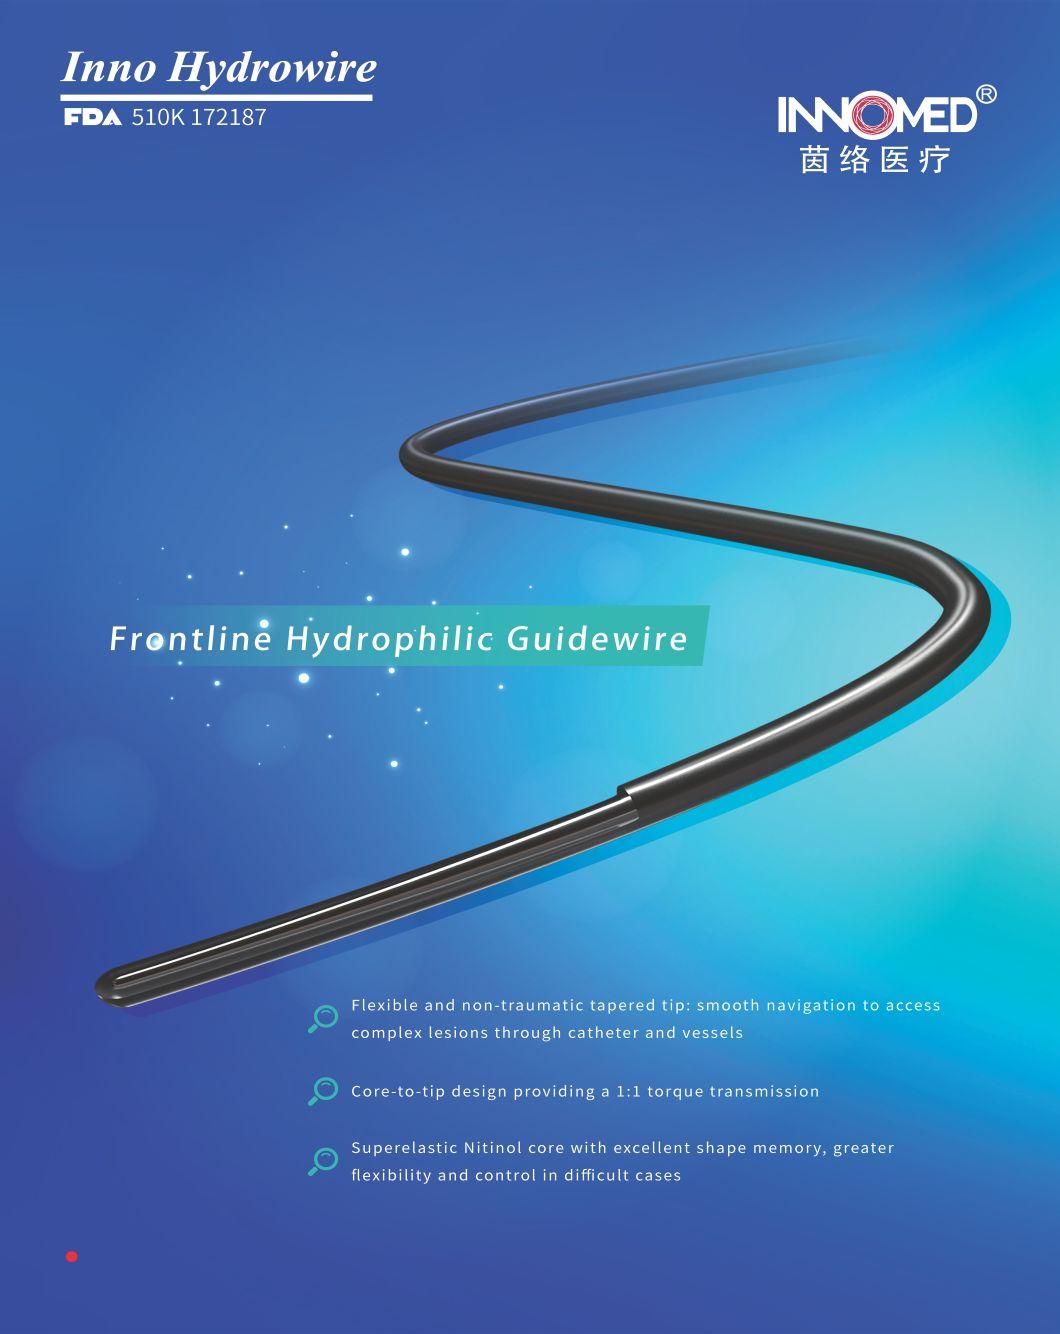 Manufacturer of Disposable Medical Consumables for Contrast Guide Wires